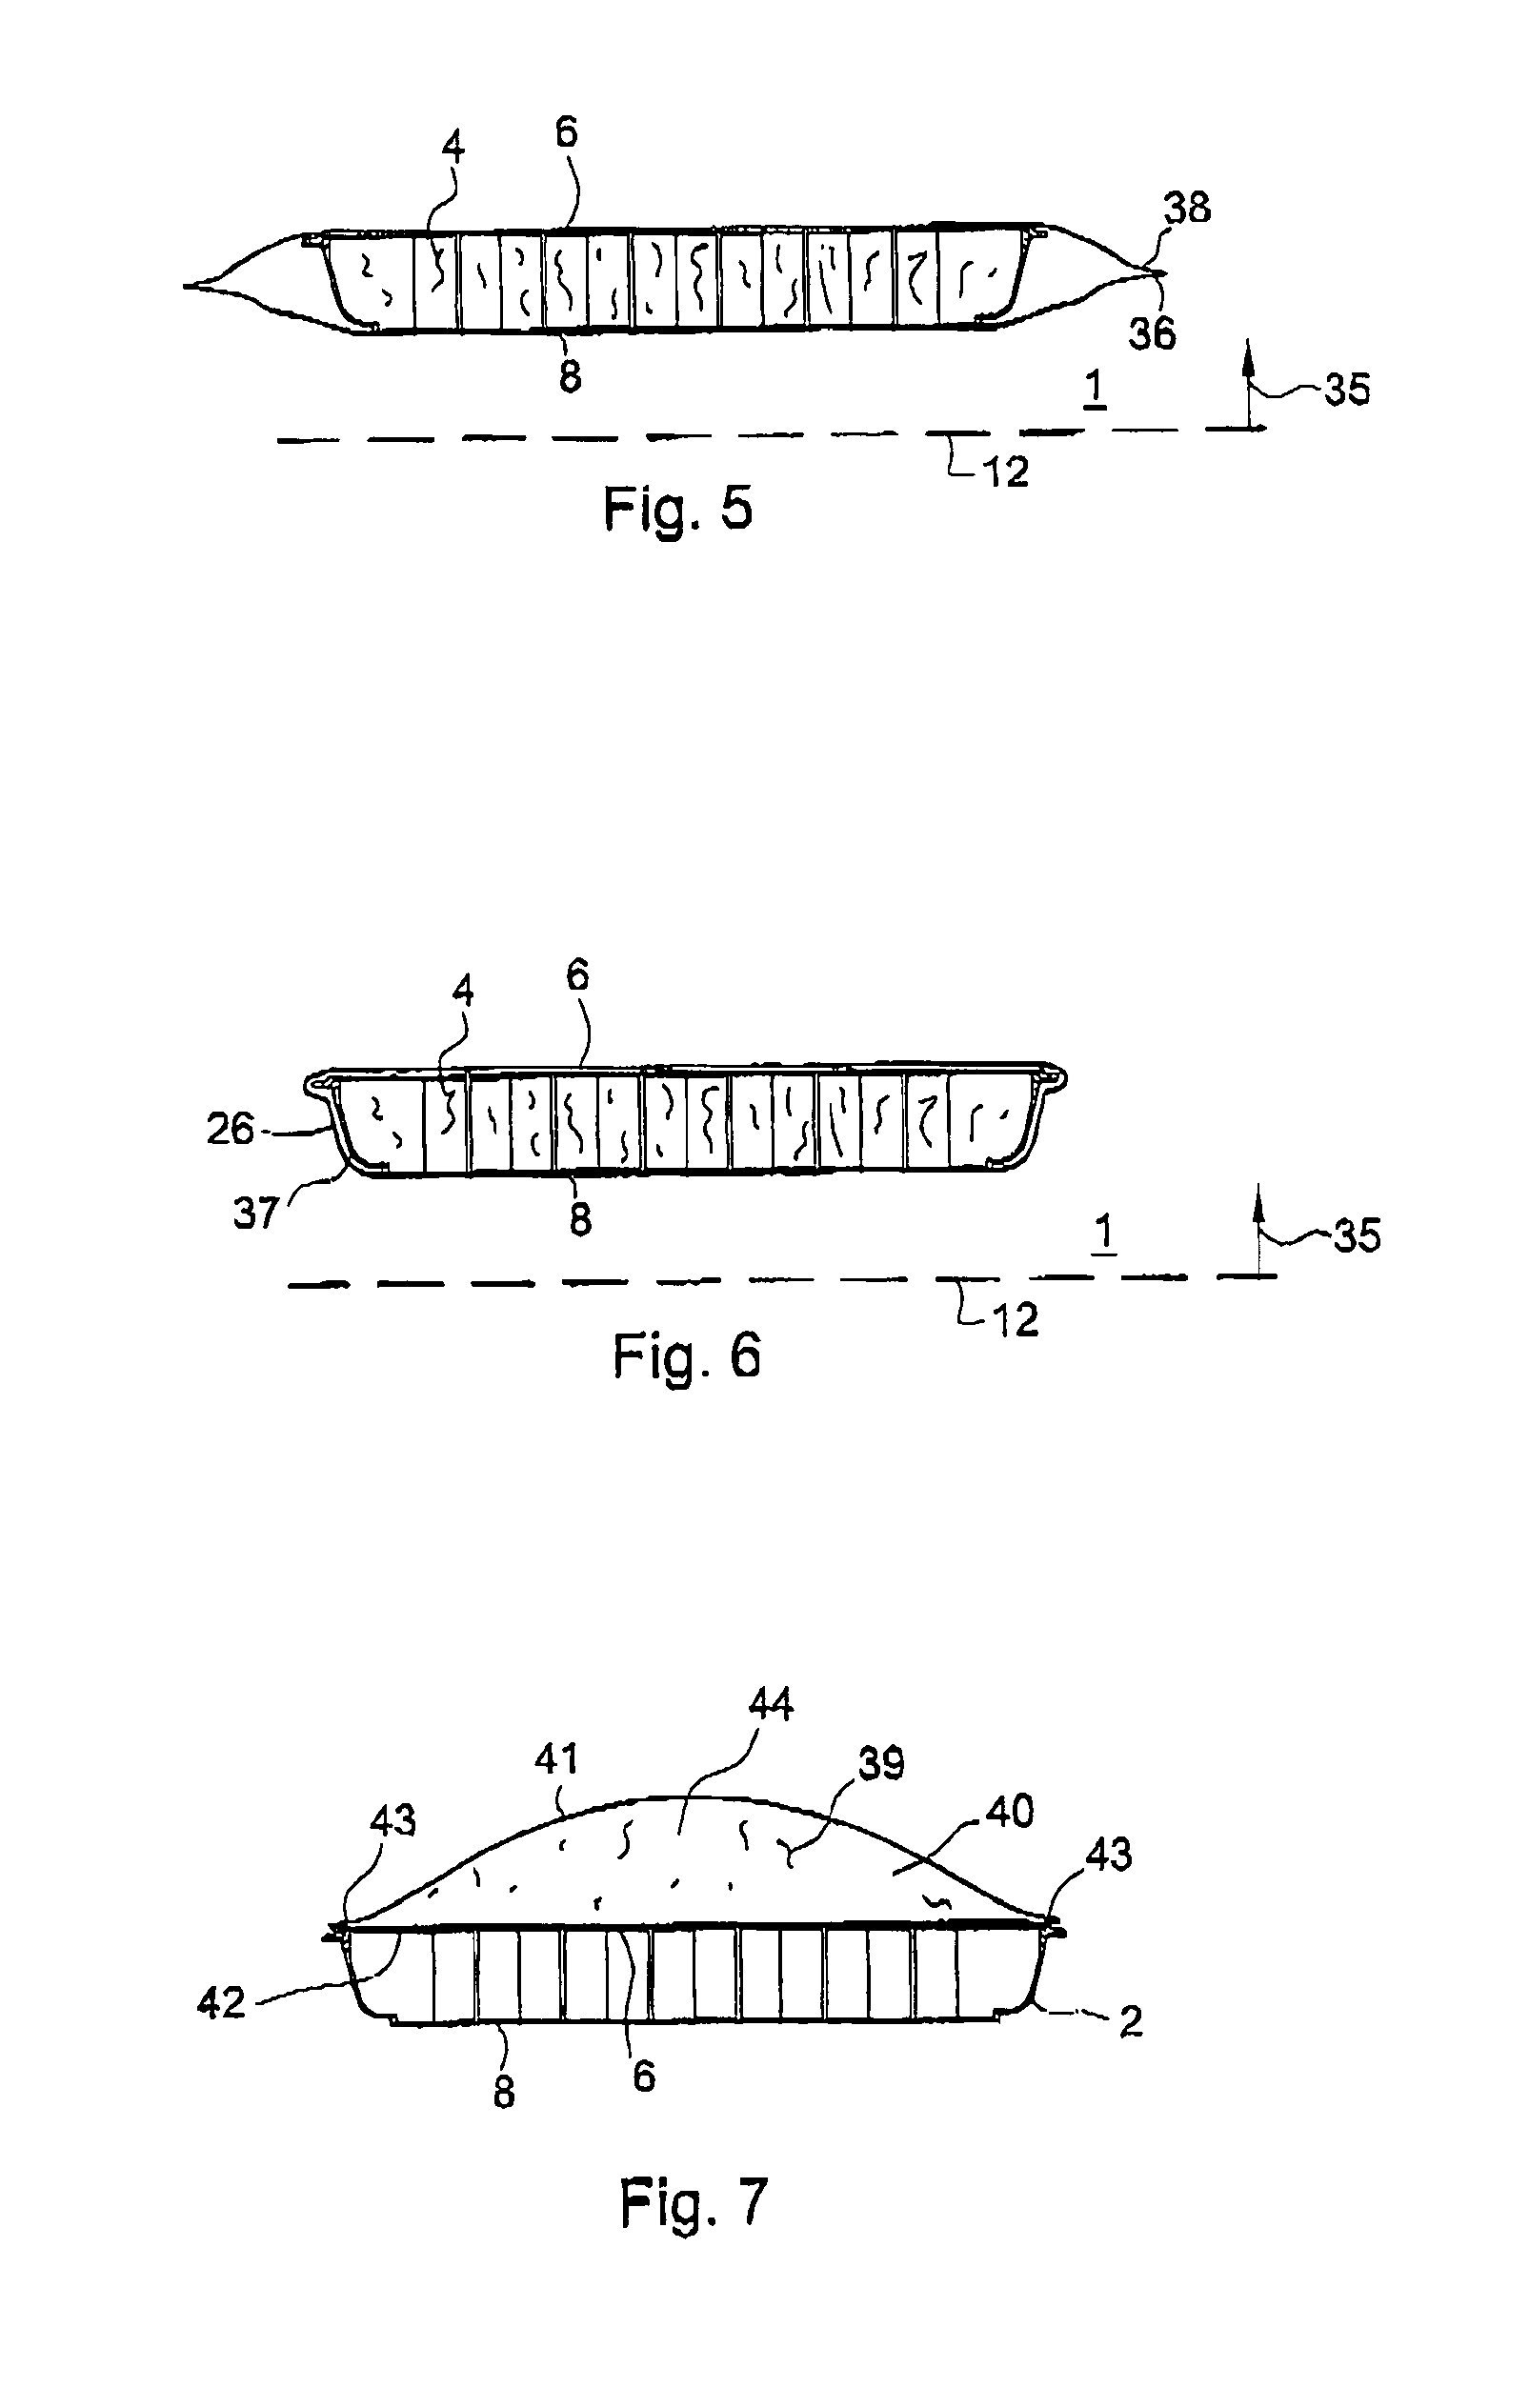 Form-retaining pad for preparing a beverage suitable for consumption